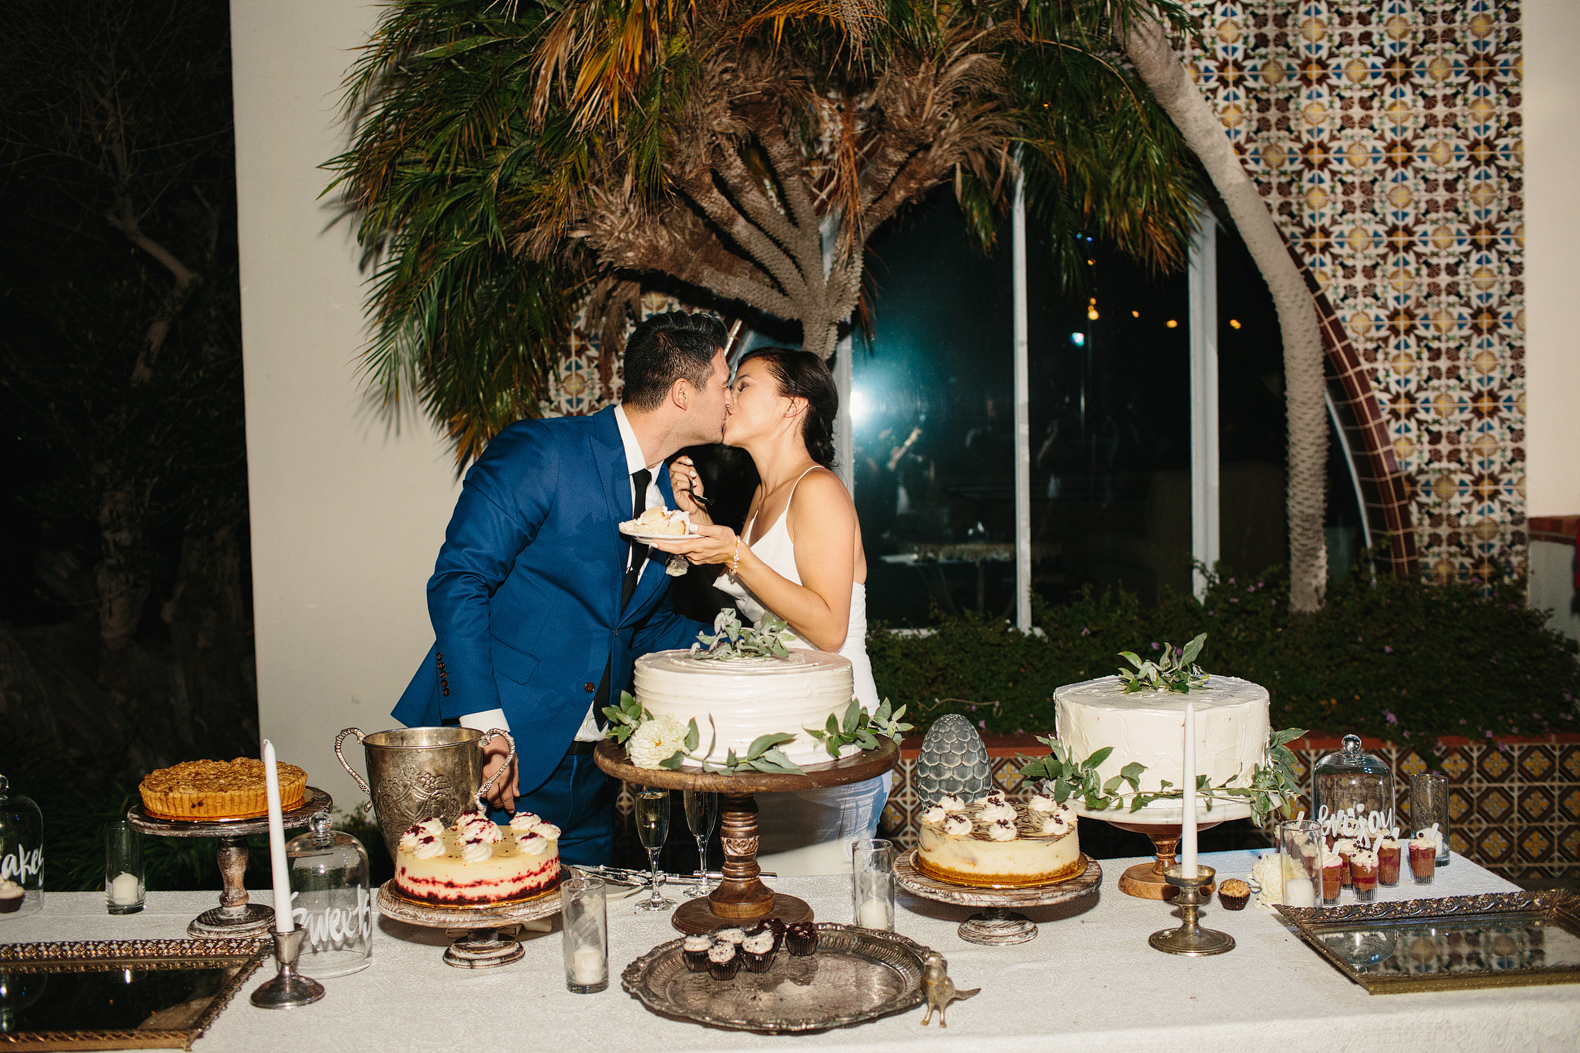 The couple's cake cutting. 